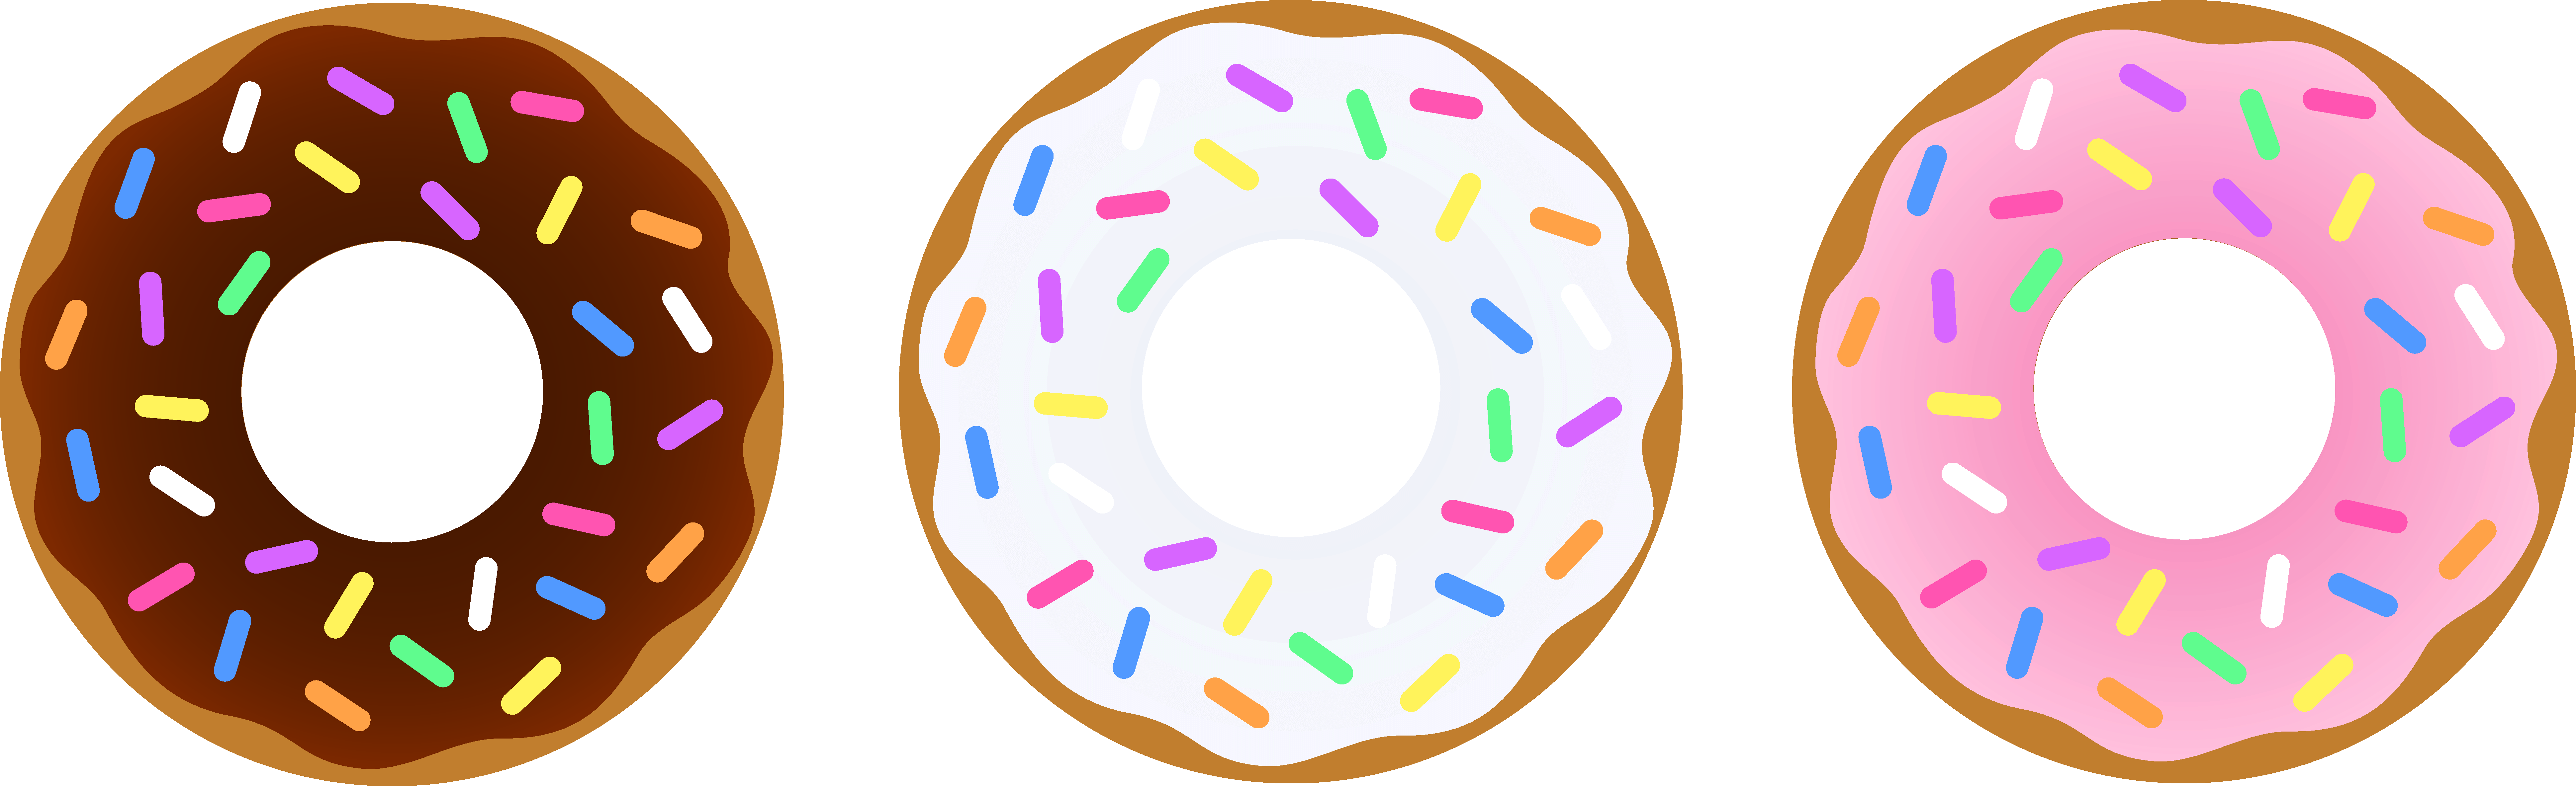 Free coffee and donut clipart